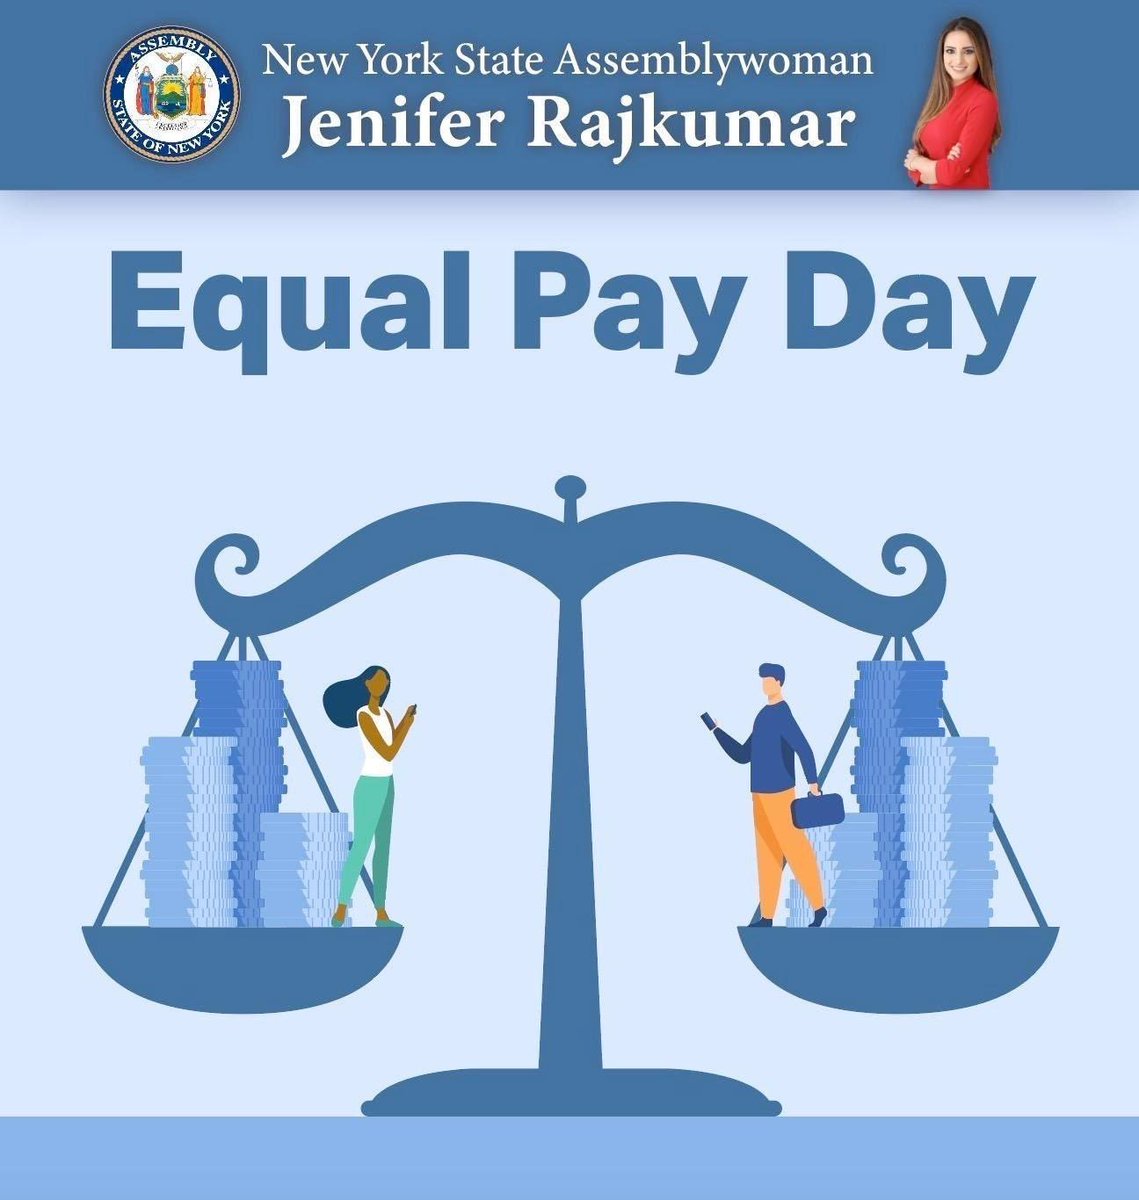 Today is Equal Pay Day. As a lawyer, I started my career by representing women experiencing inequality in the workplace. I will not stop fighting until we end the gender pay gap, which will cut poverty in half and add $500 billion to US GDP. #EqualPayDay